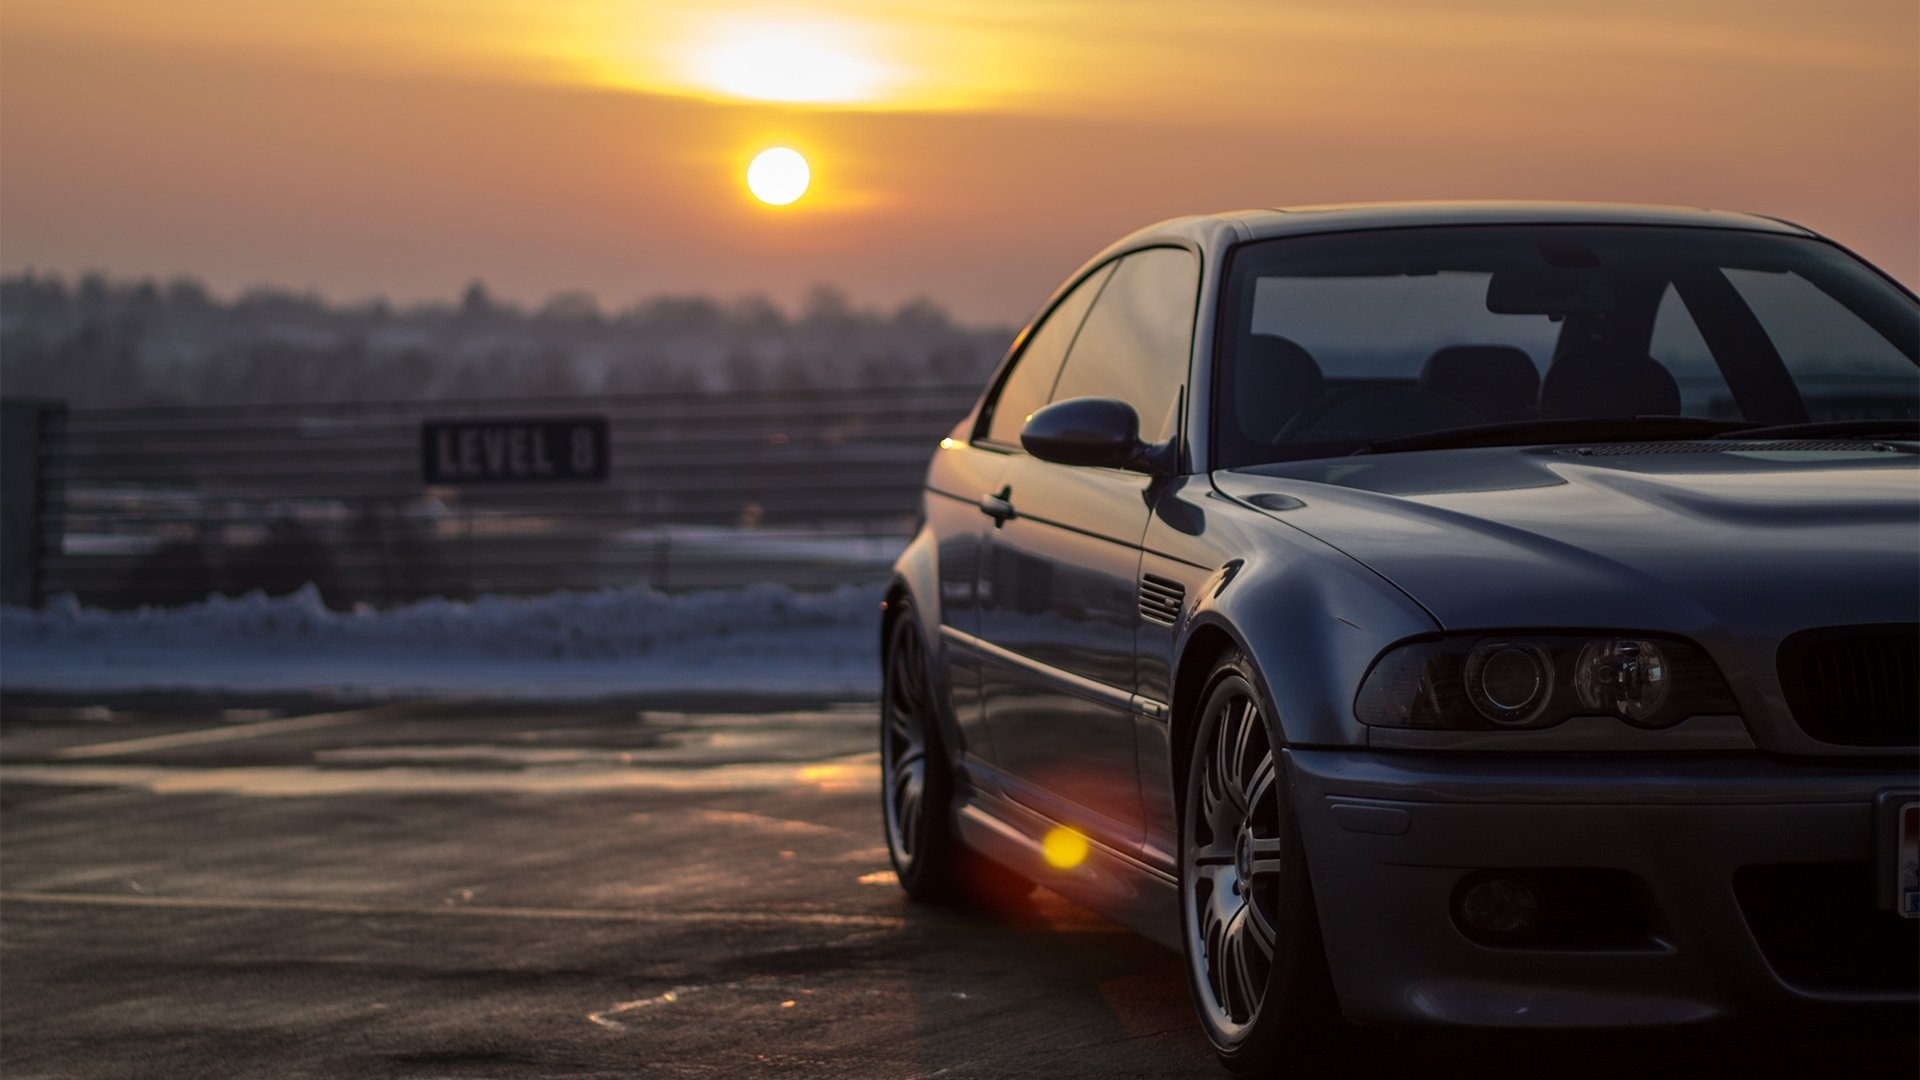 Free Download Sunset Cars Bmw E46 M3 Wallpaper 1920x1080 585878 1920x1080 For Your Desktop Mobile Tablet Explore 71 Bmw M3 Wallpaper Bmw E30 Wallpaper Bmw M3 E46 Wallpaper Bmw Wallpaper 1920x1080